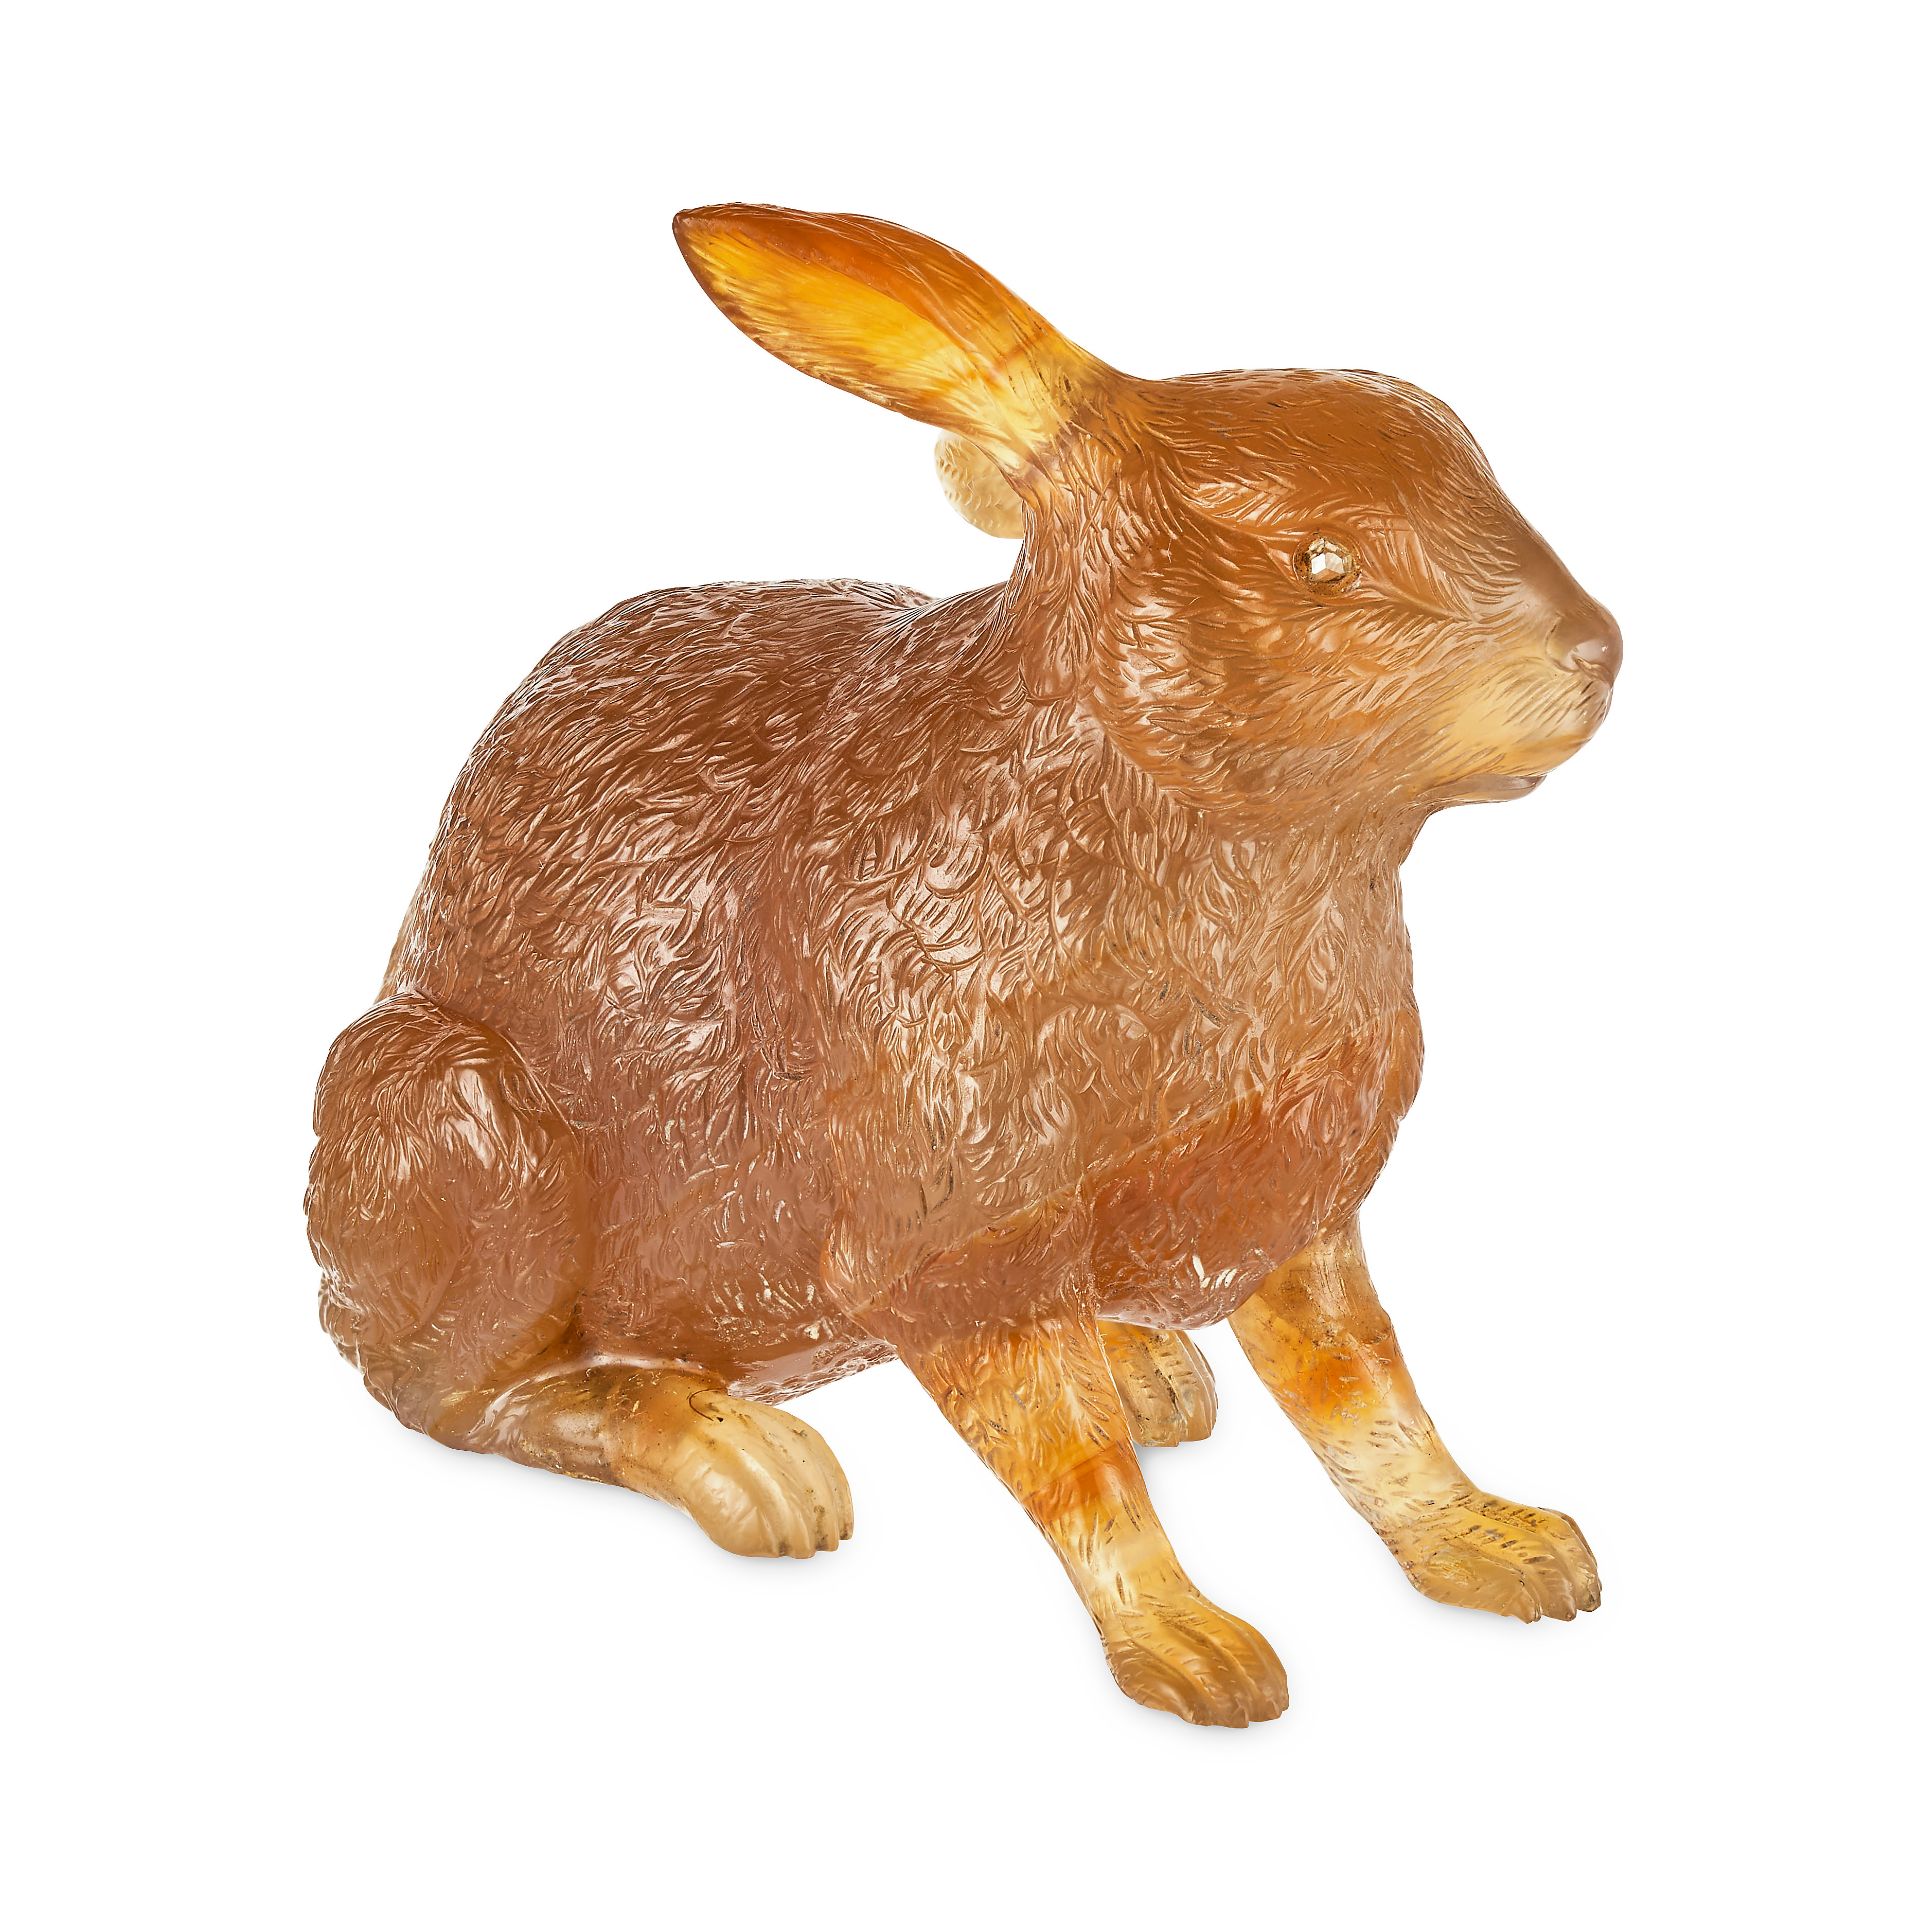 FABERGE, A JEWELLED AGATE FIGURE OF A HARE / LEVERETT, ST PETERSBURG, CIRCA 1900 - Image 7 of 10